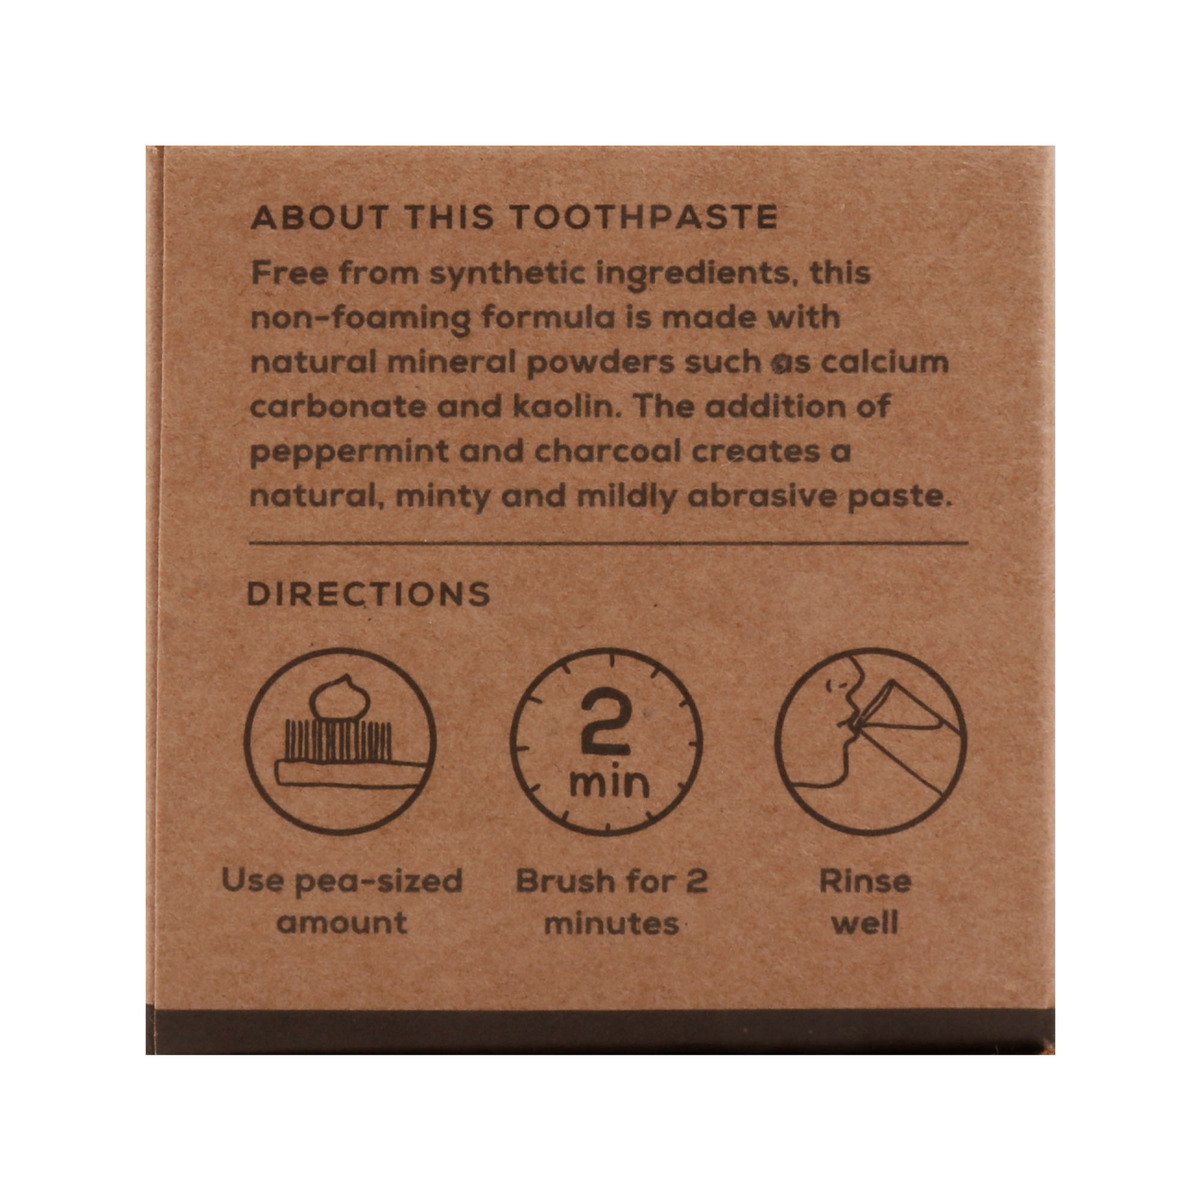 Georganics Activated Charcoal Natural Toothpaste 60ml